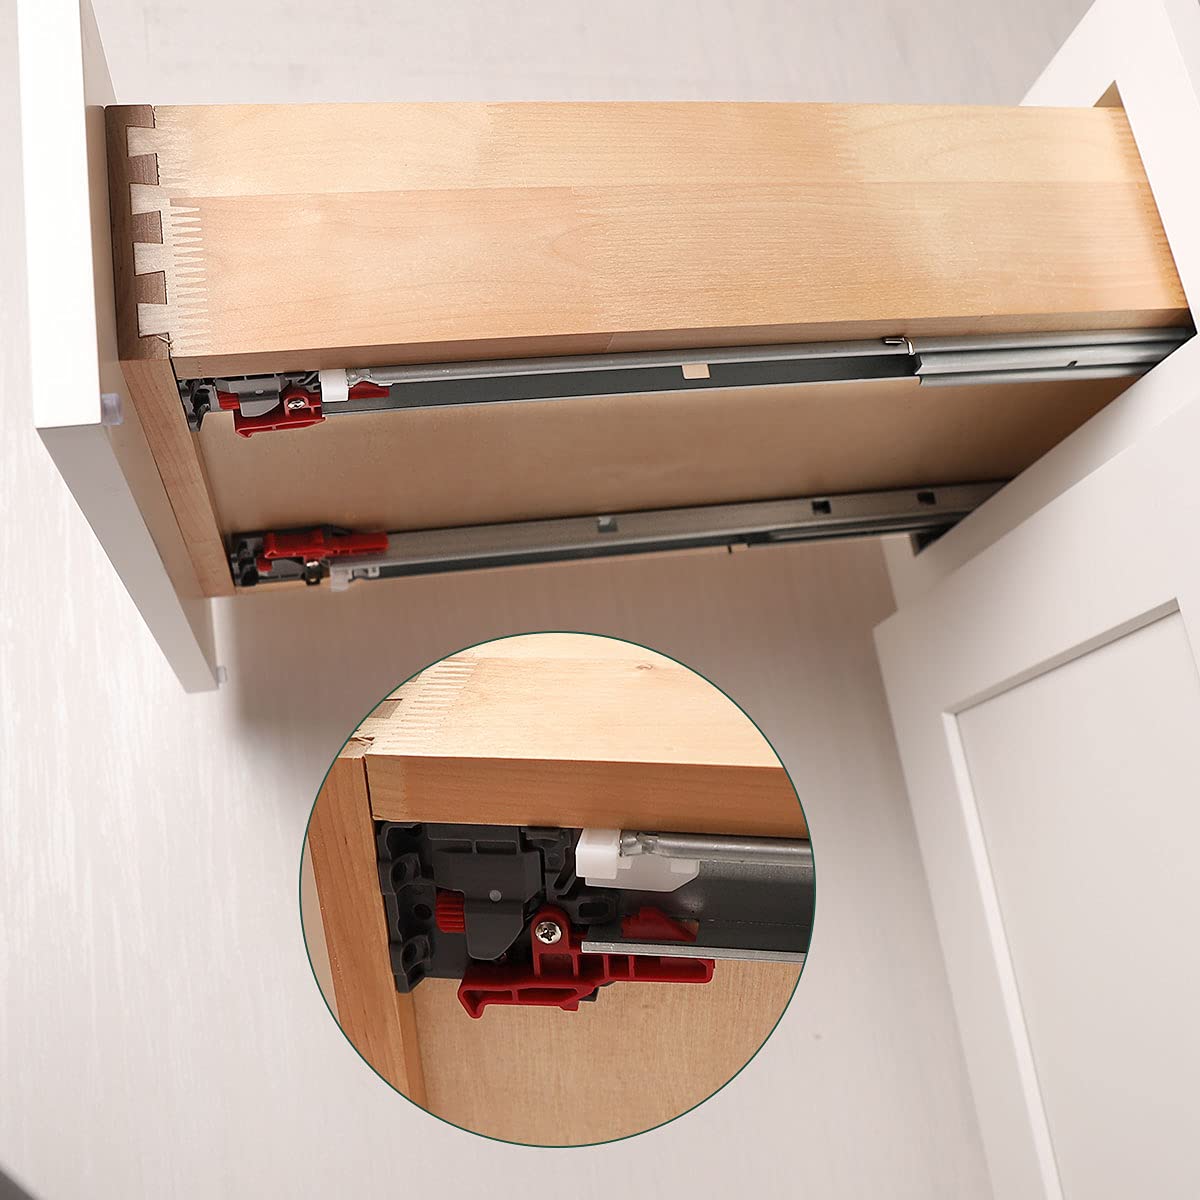 Gobrico Soft Close Under Mounted Drawer Slides 21 inch, Heavy Duty Concealed Drawer Slide Glides Runners Full Extension, with Locking Device Rear Mounting Brackets, 1Pair